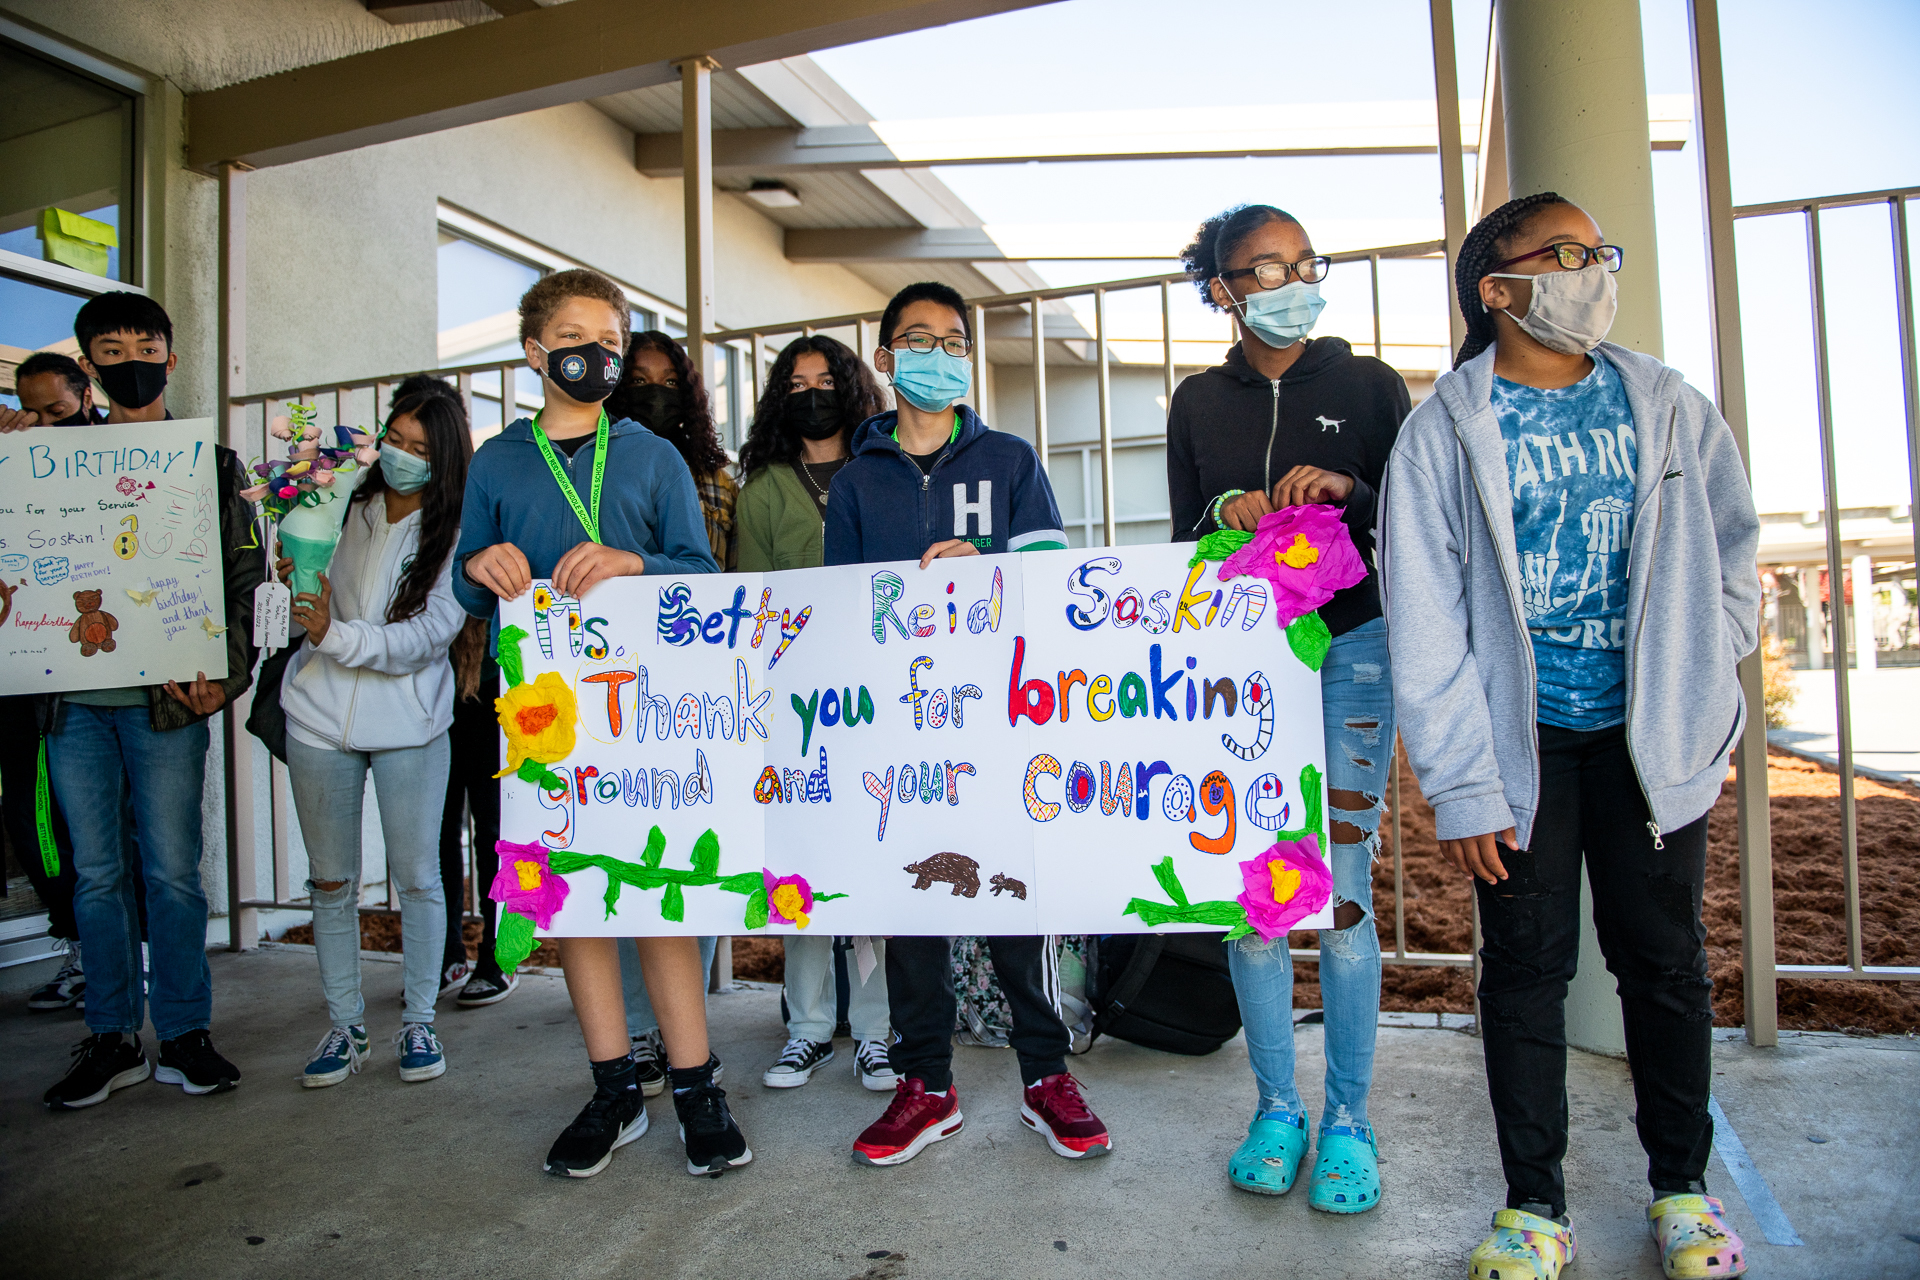 Masked students hold up signs thanking Betty Reid Soskin.